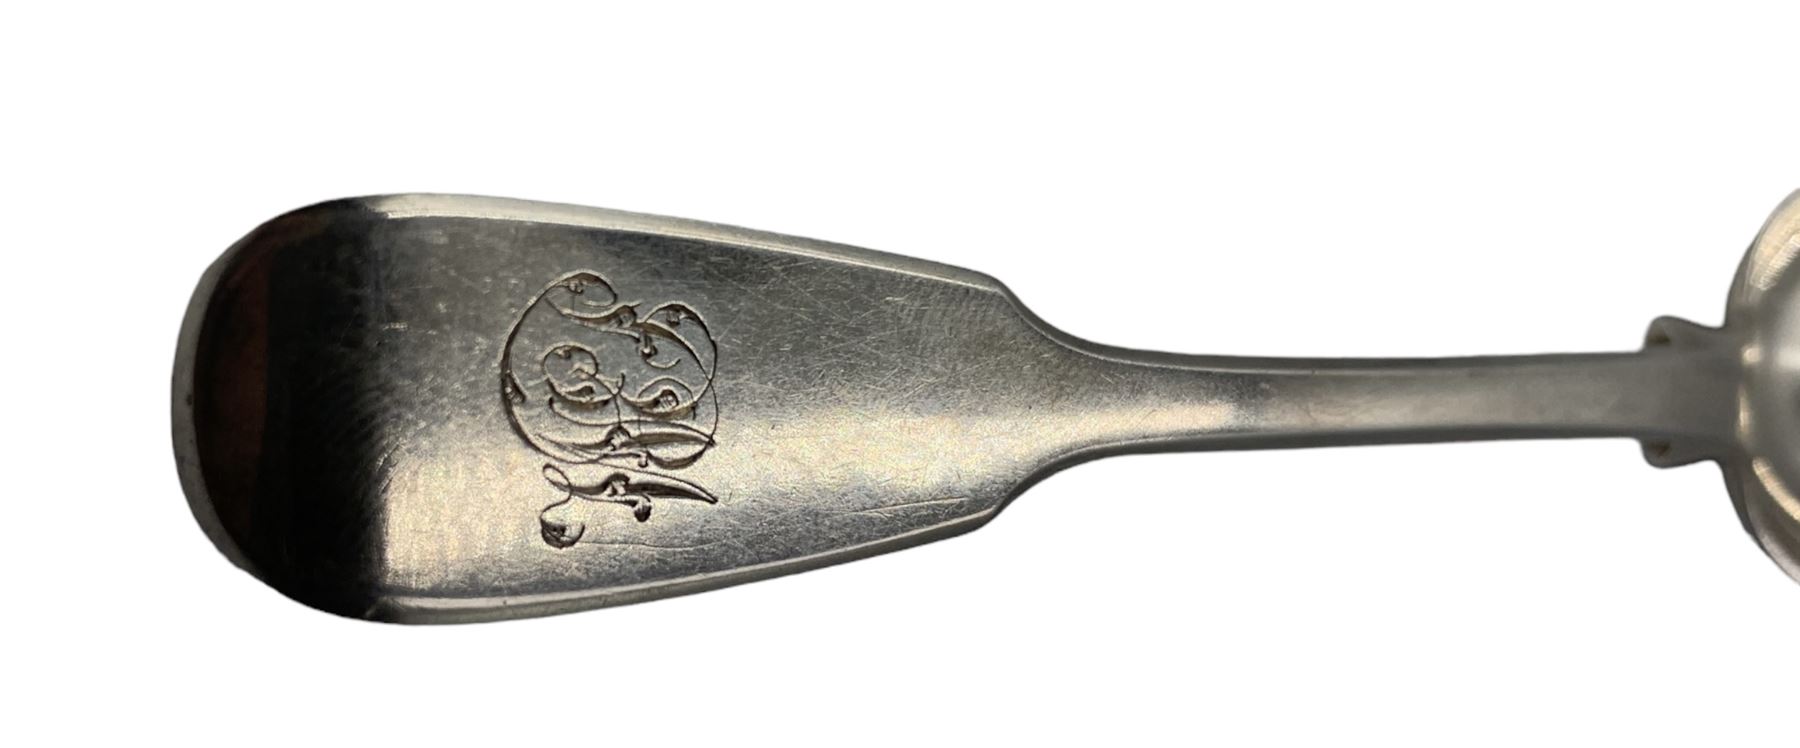 Set of six Victorian silver fiddle patten teaspoons engraved with initials by Henry Holland - Image 3 of 3